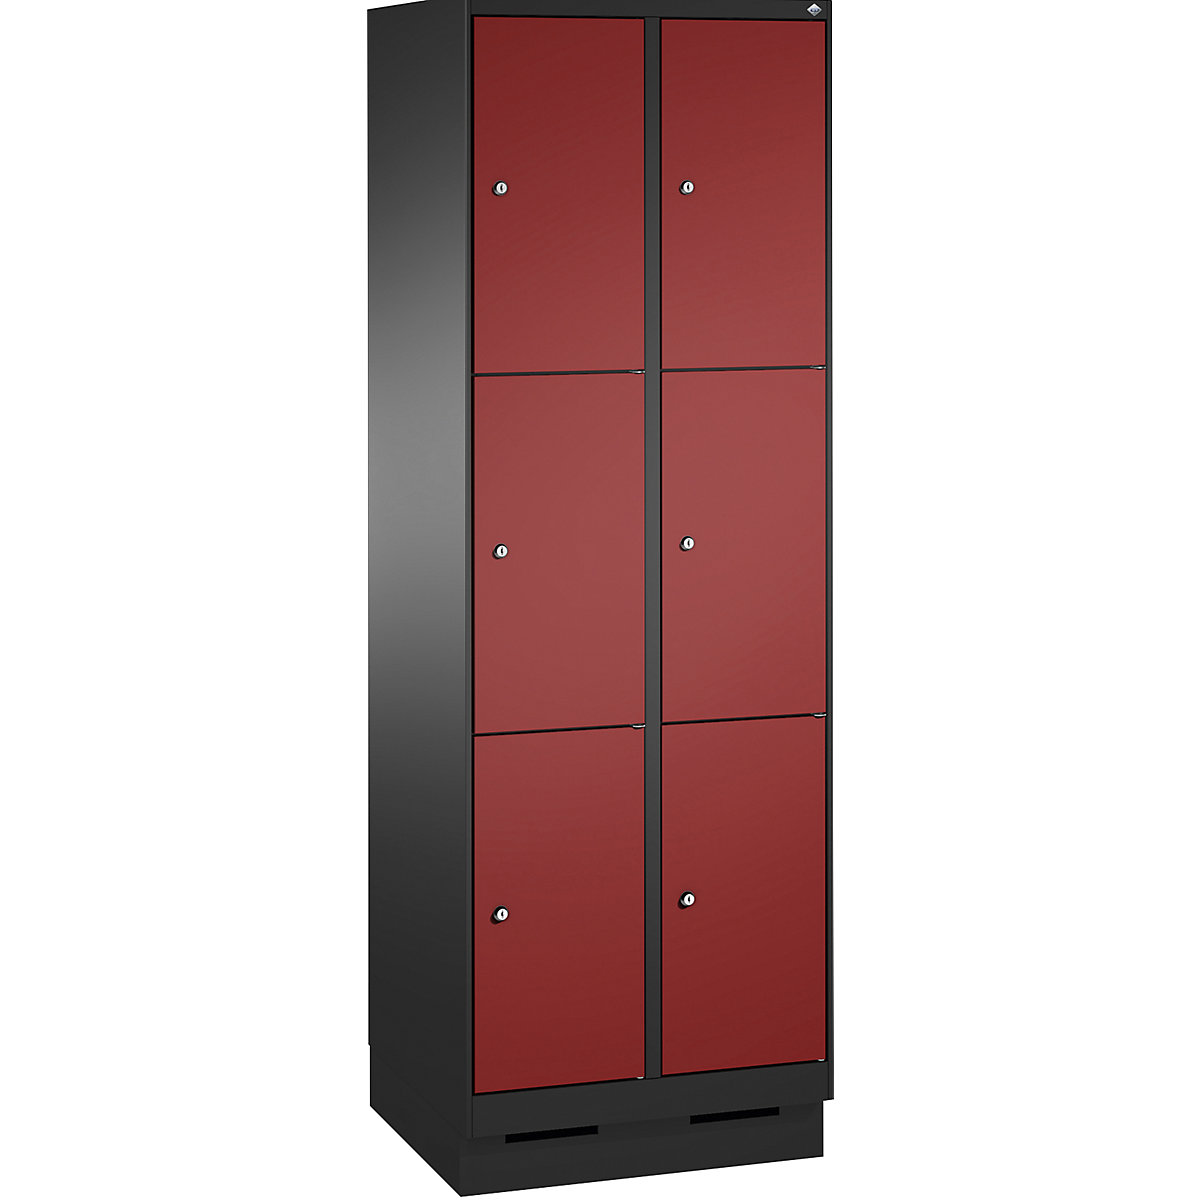 EVOLO locker unit, with plinth – C+P, 2 compartments, 3 shelf compartments each, compartment width 300 mm, black grey / ruby red-11